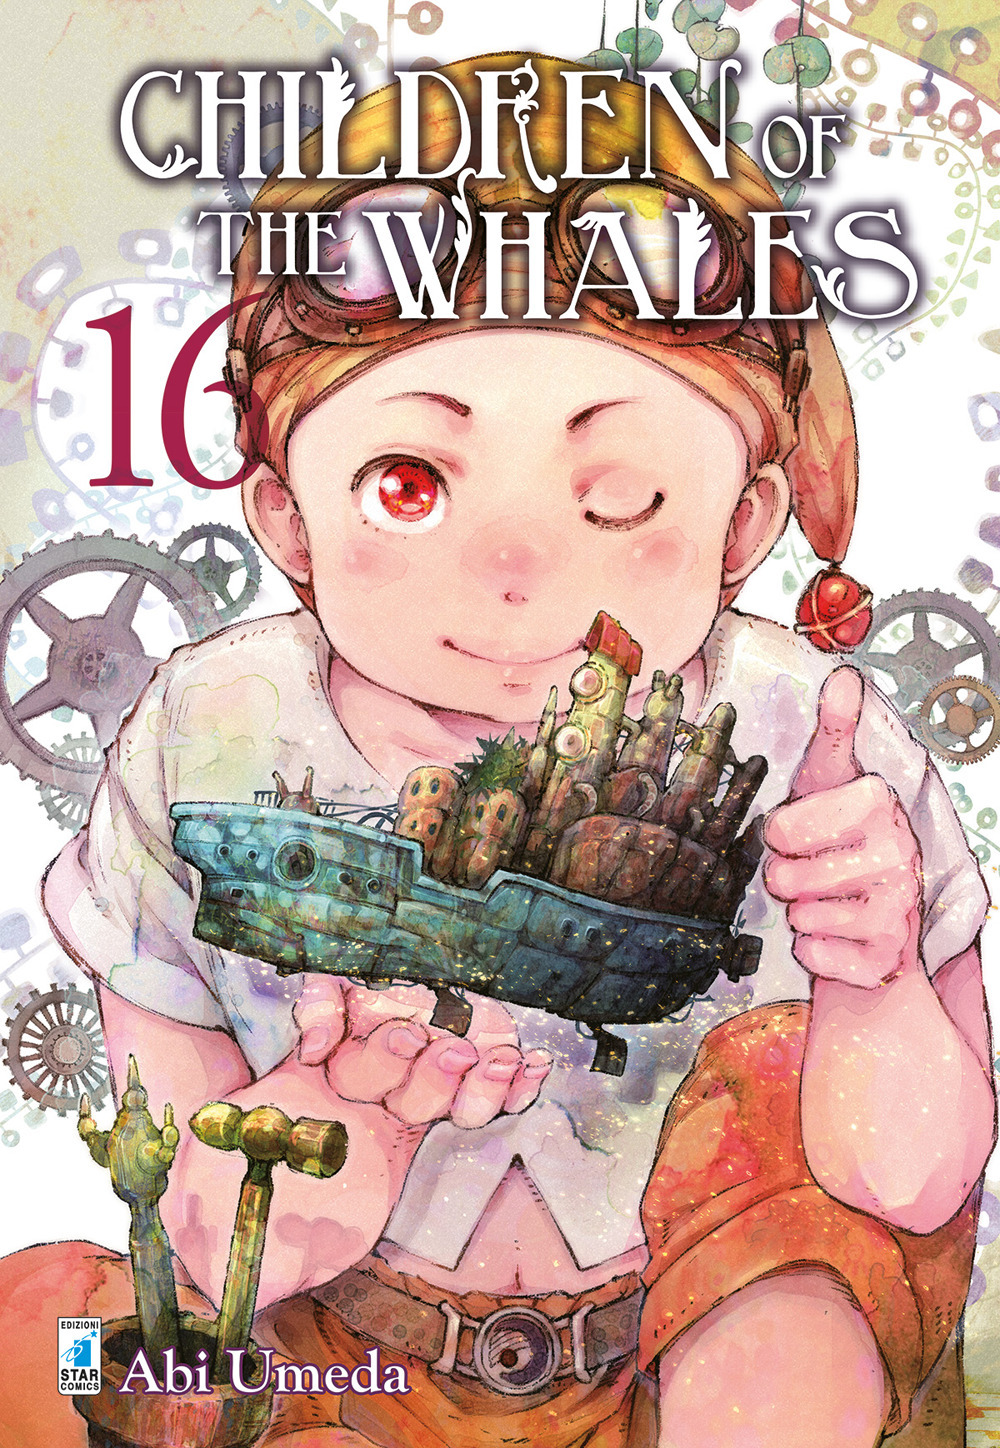 Children of the whales. Vol. 16